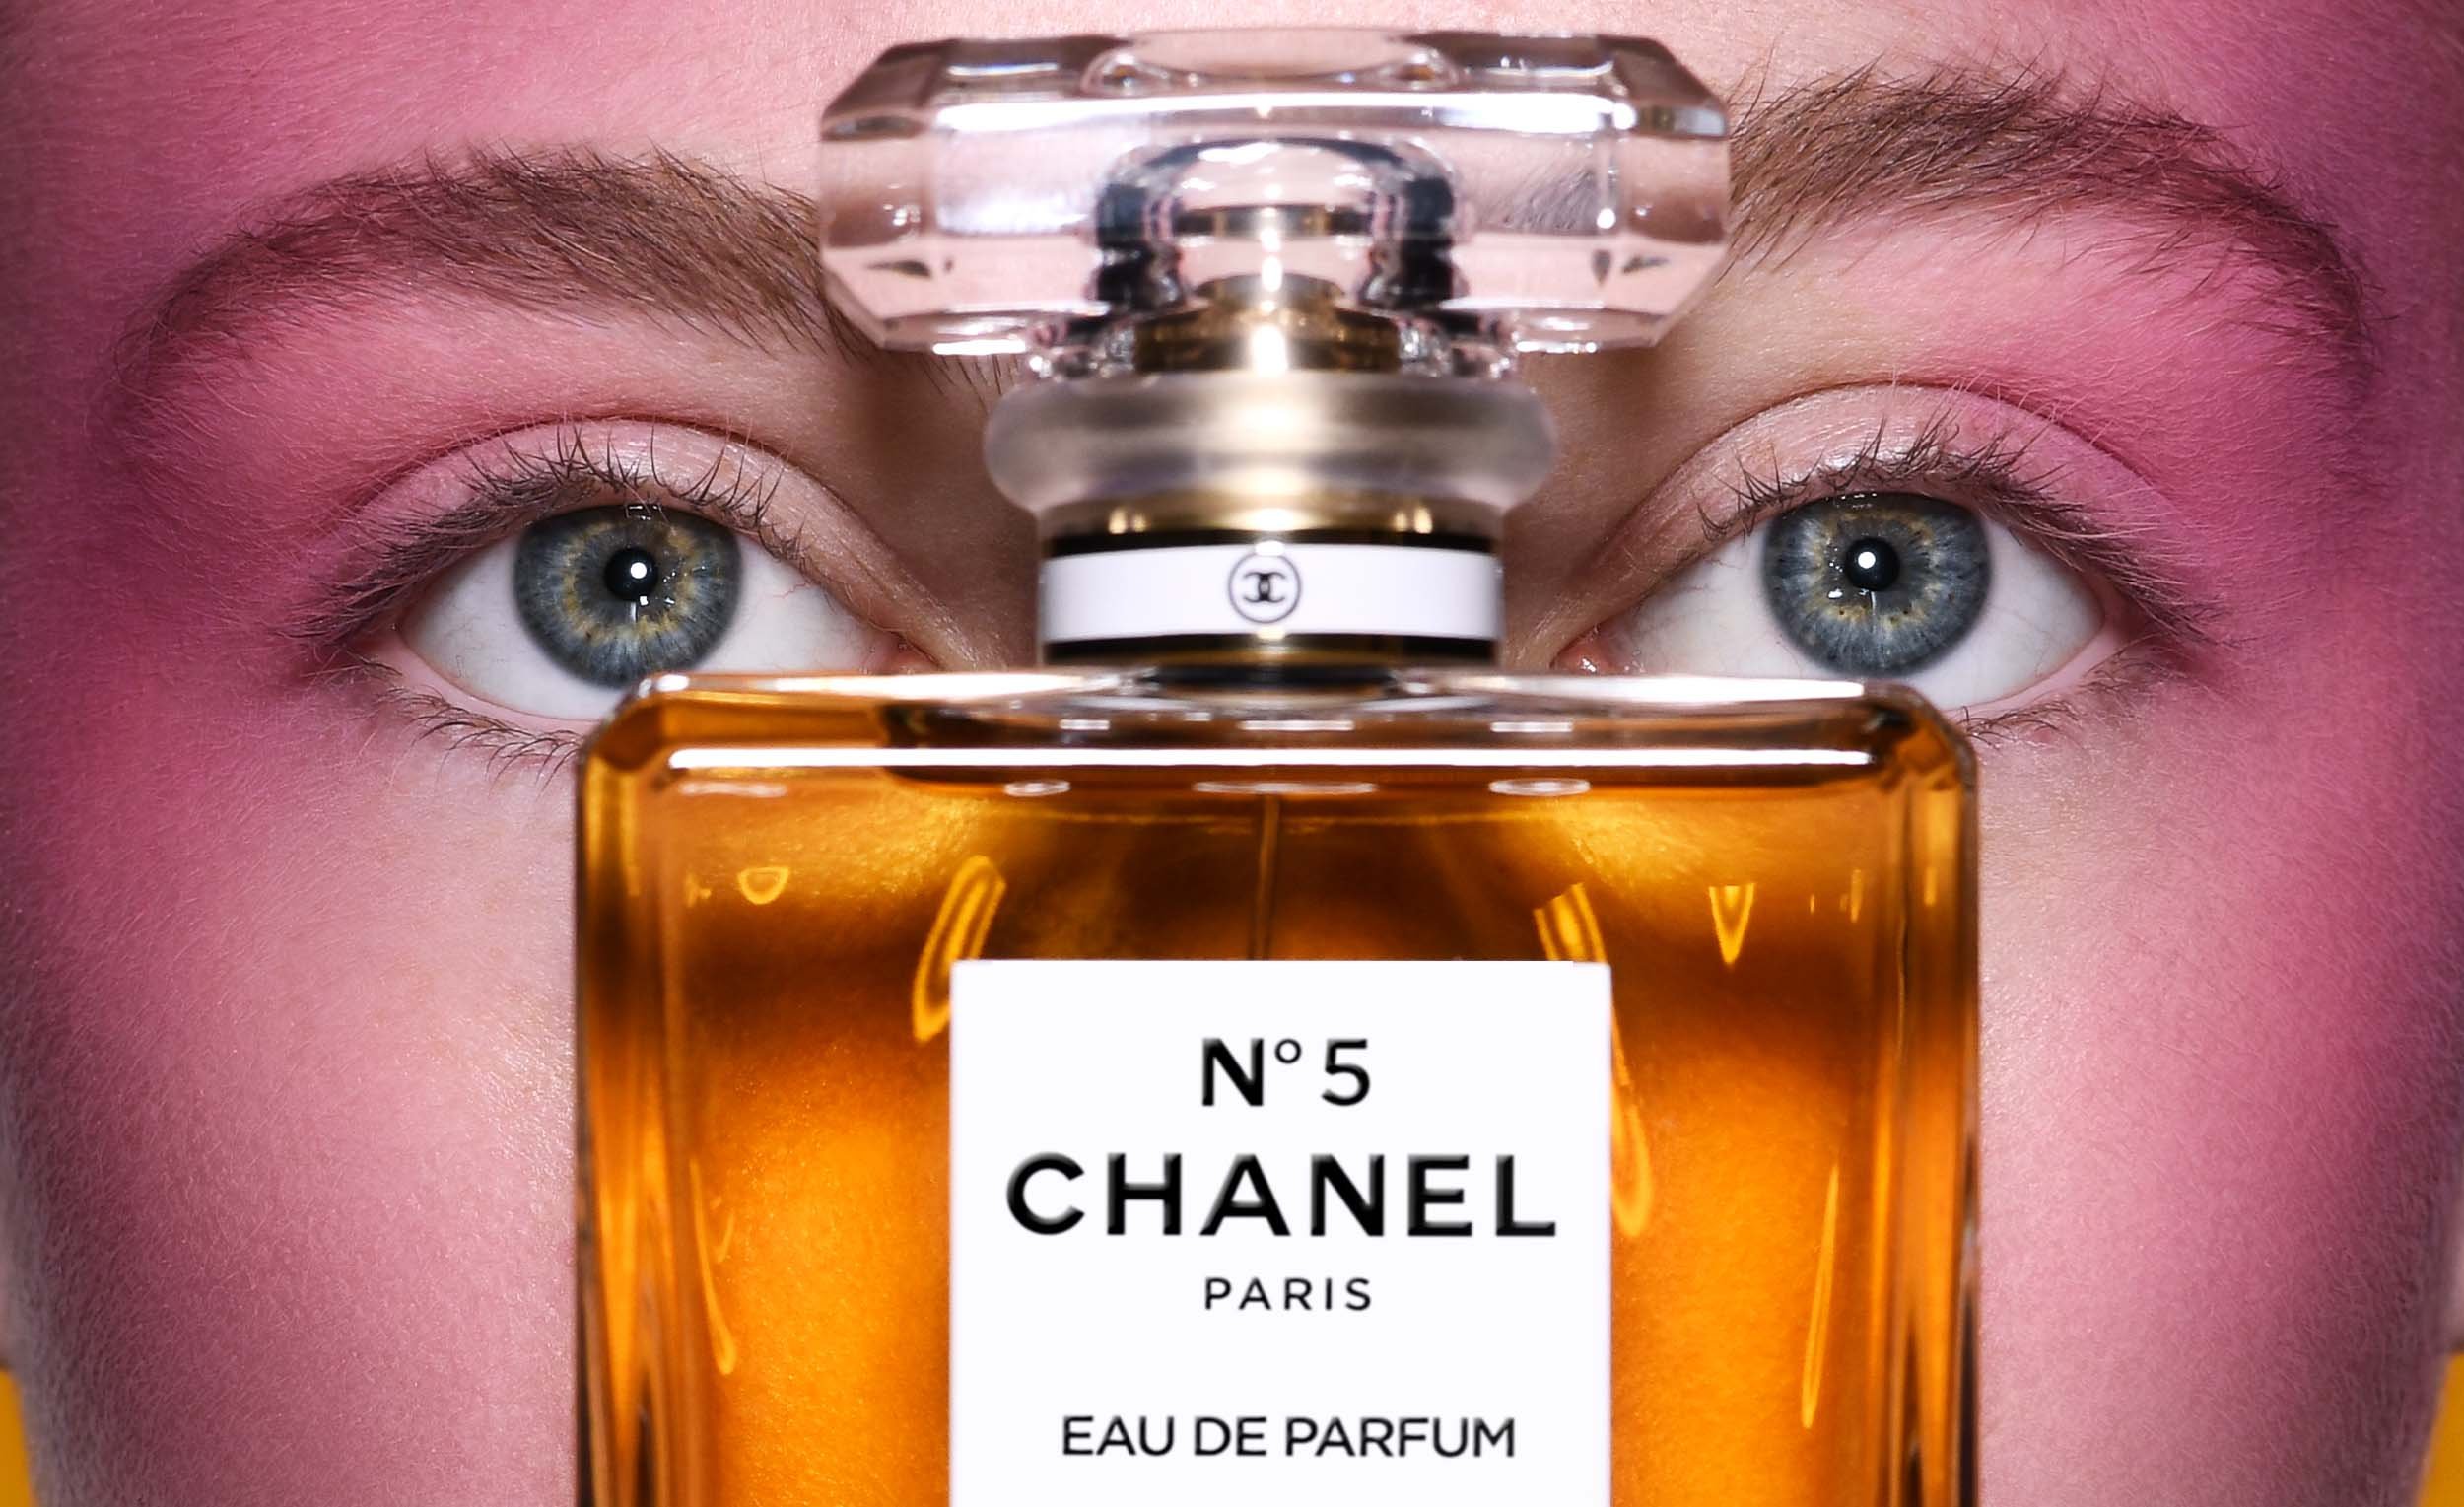 CHANEL x CABLE magazine